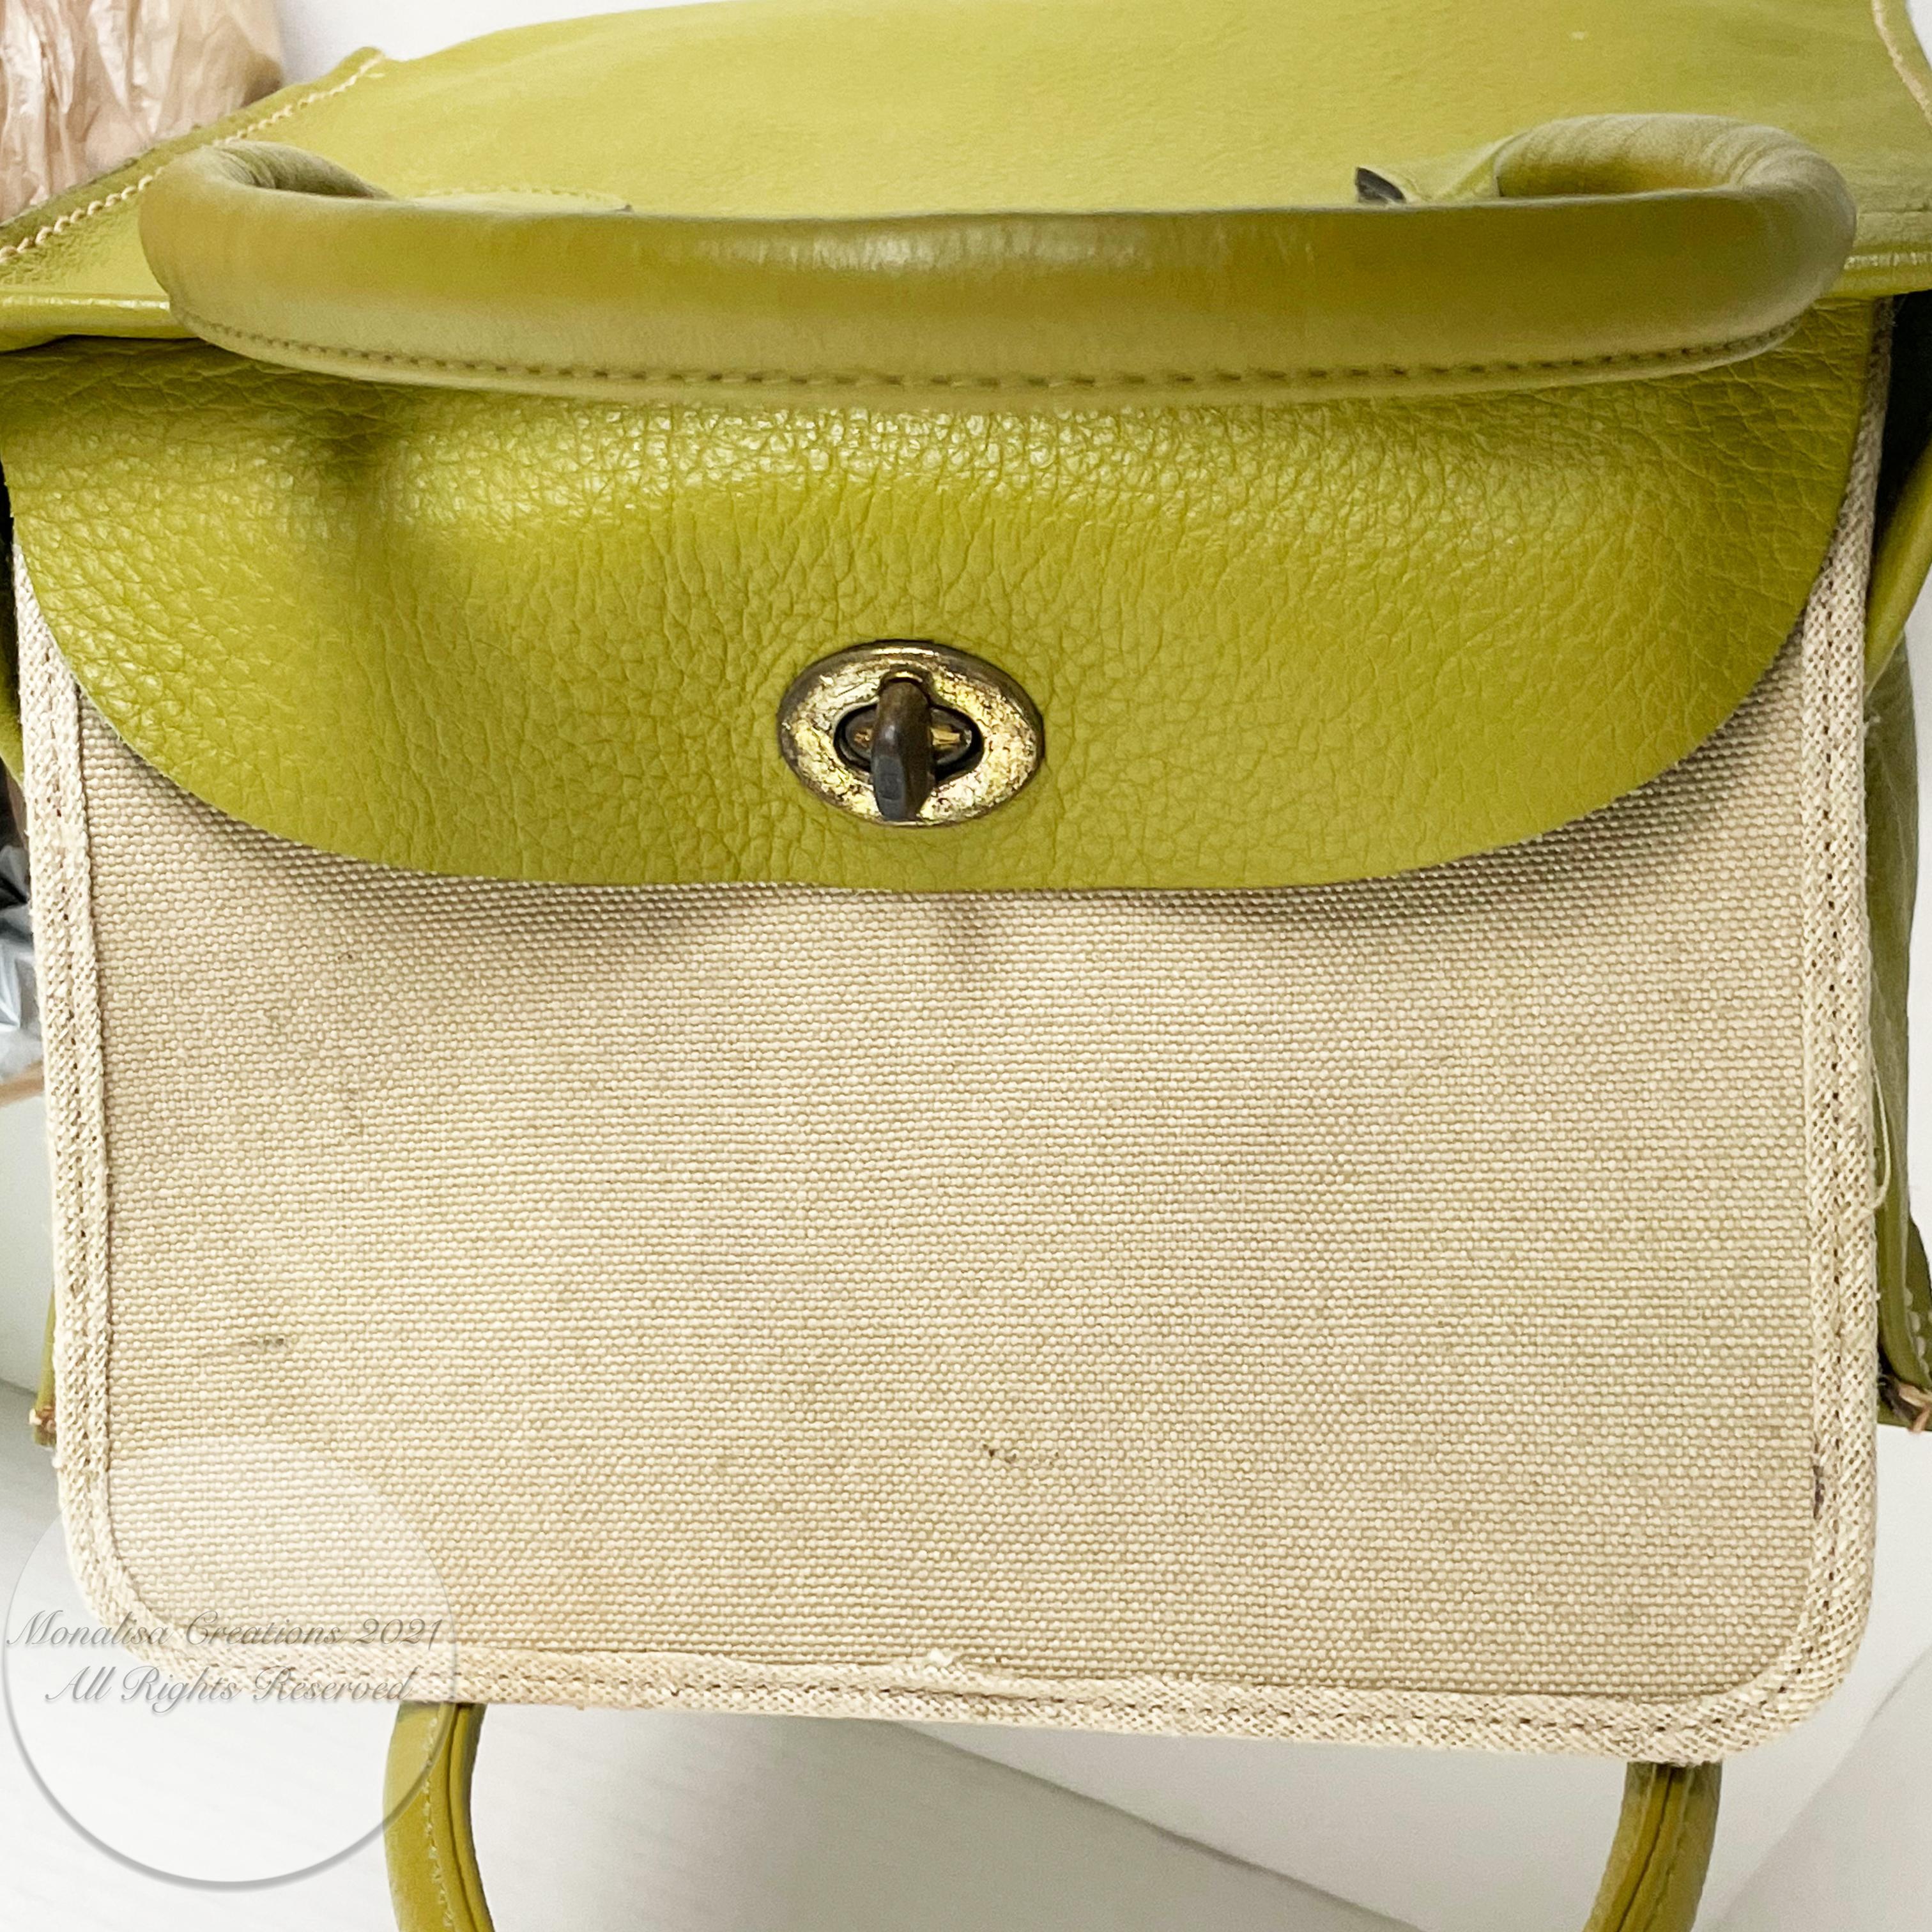 Bonnie Cashin for Coach Dinky Tote Bag Cashin Carry Lime Green Leather 60s NYC  3